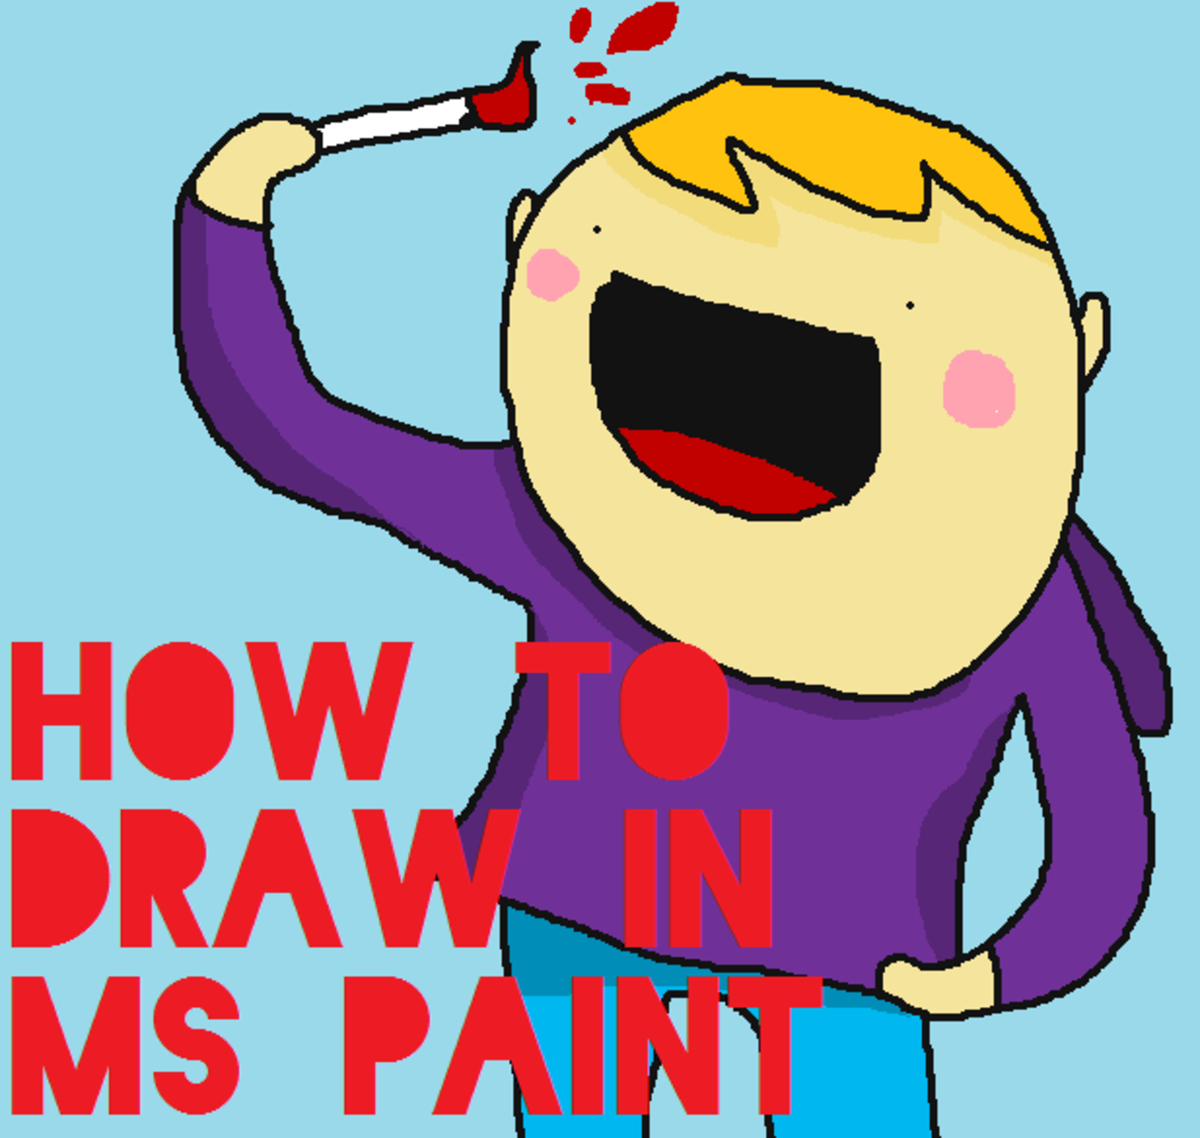 How to draw in MS Paint Tutorial